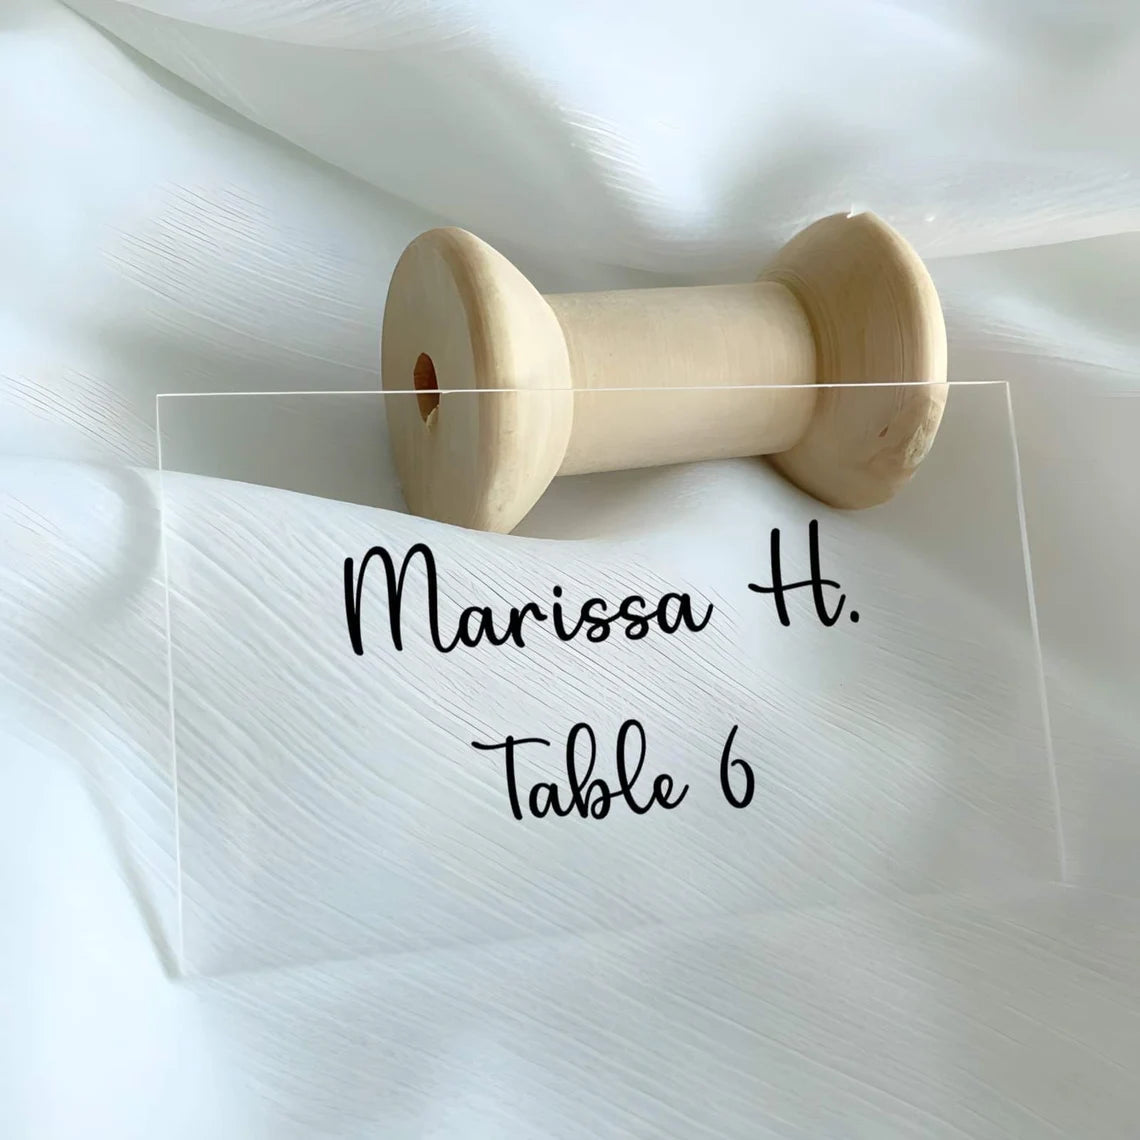 Custom Table Place Cards Settings Guests Names- Weddings, Bar Bat Mitzvah, Parties, Events